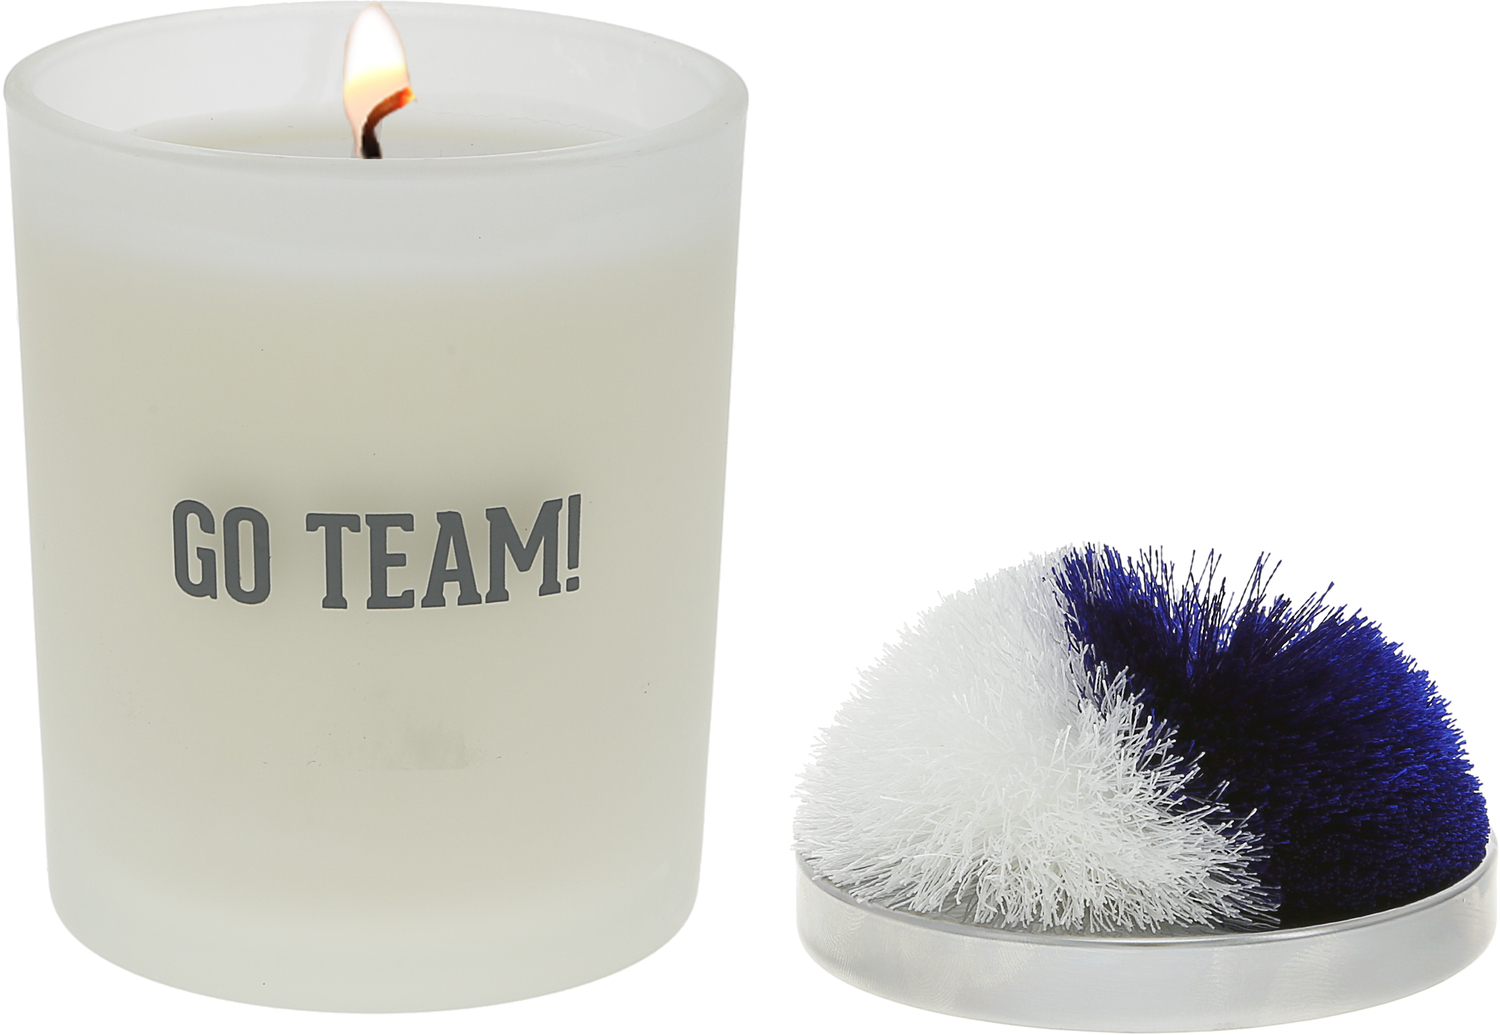 Go Team! - Blue & White by Repre-Scent - Go Team! - Blue & White - 5.5 oz - 100% Soy Wax Candle with Pom Pom Lid
Scent: Tranquility